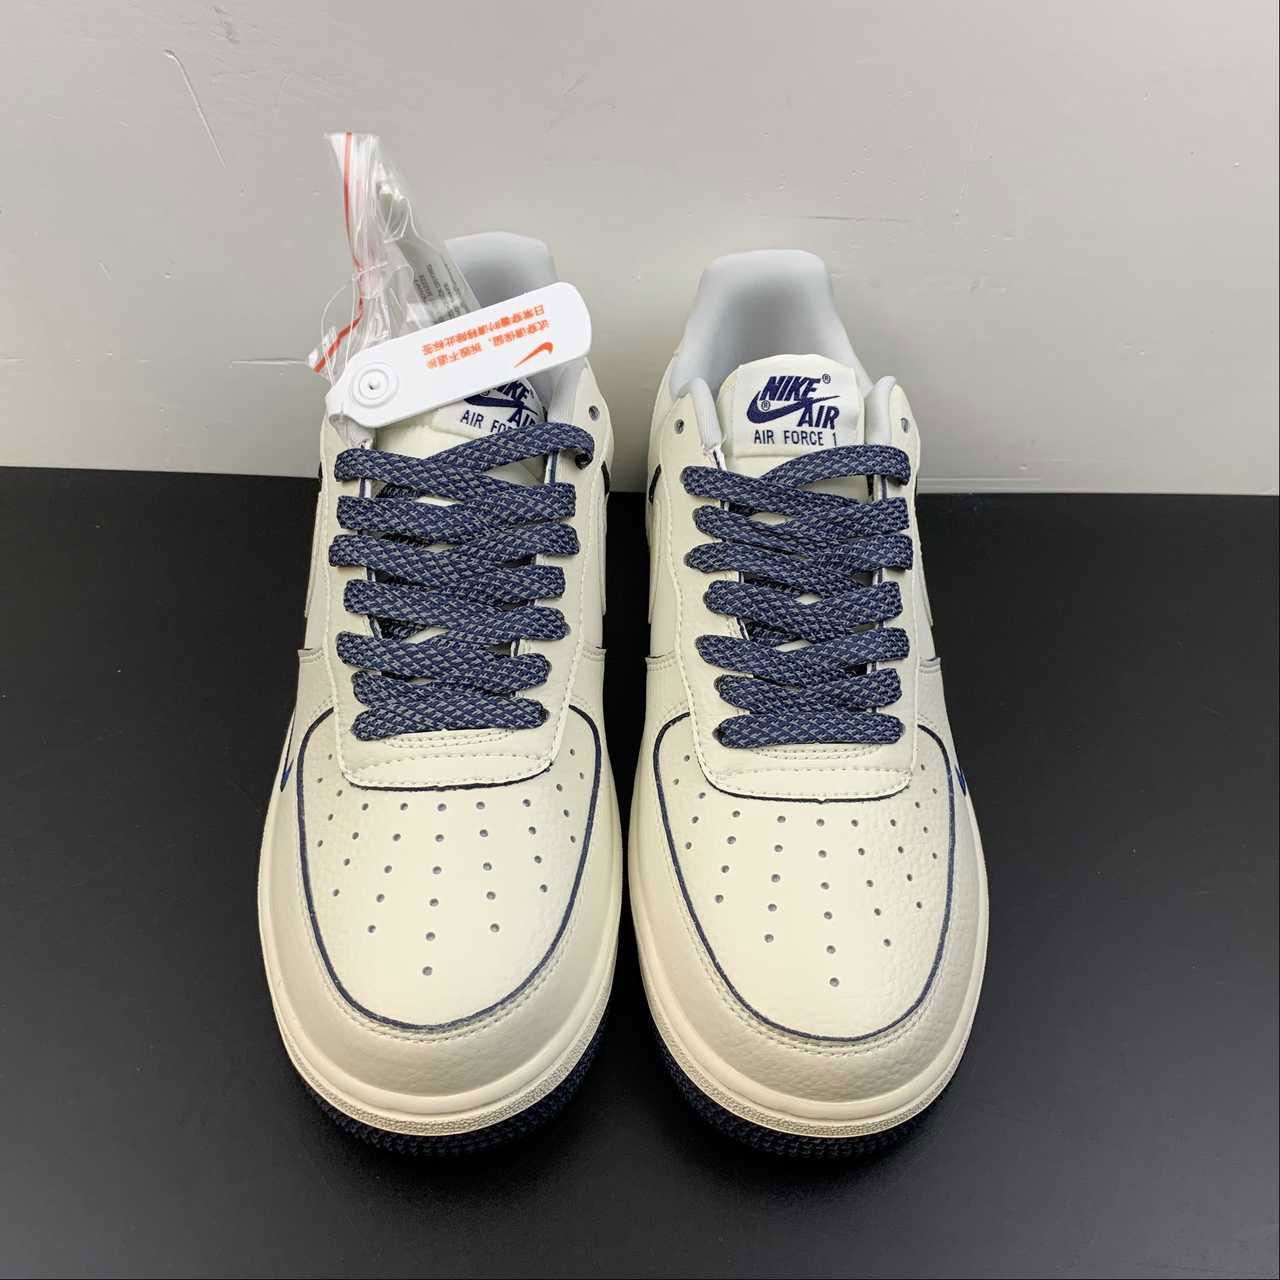      AIR FORCE 1 SHOES Air Force Low Top Casual Board Shoes DD9915-622 2